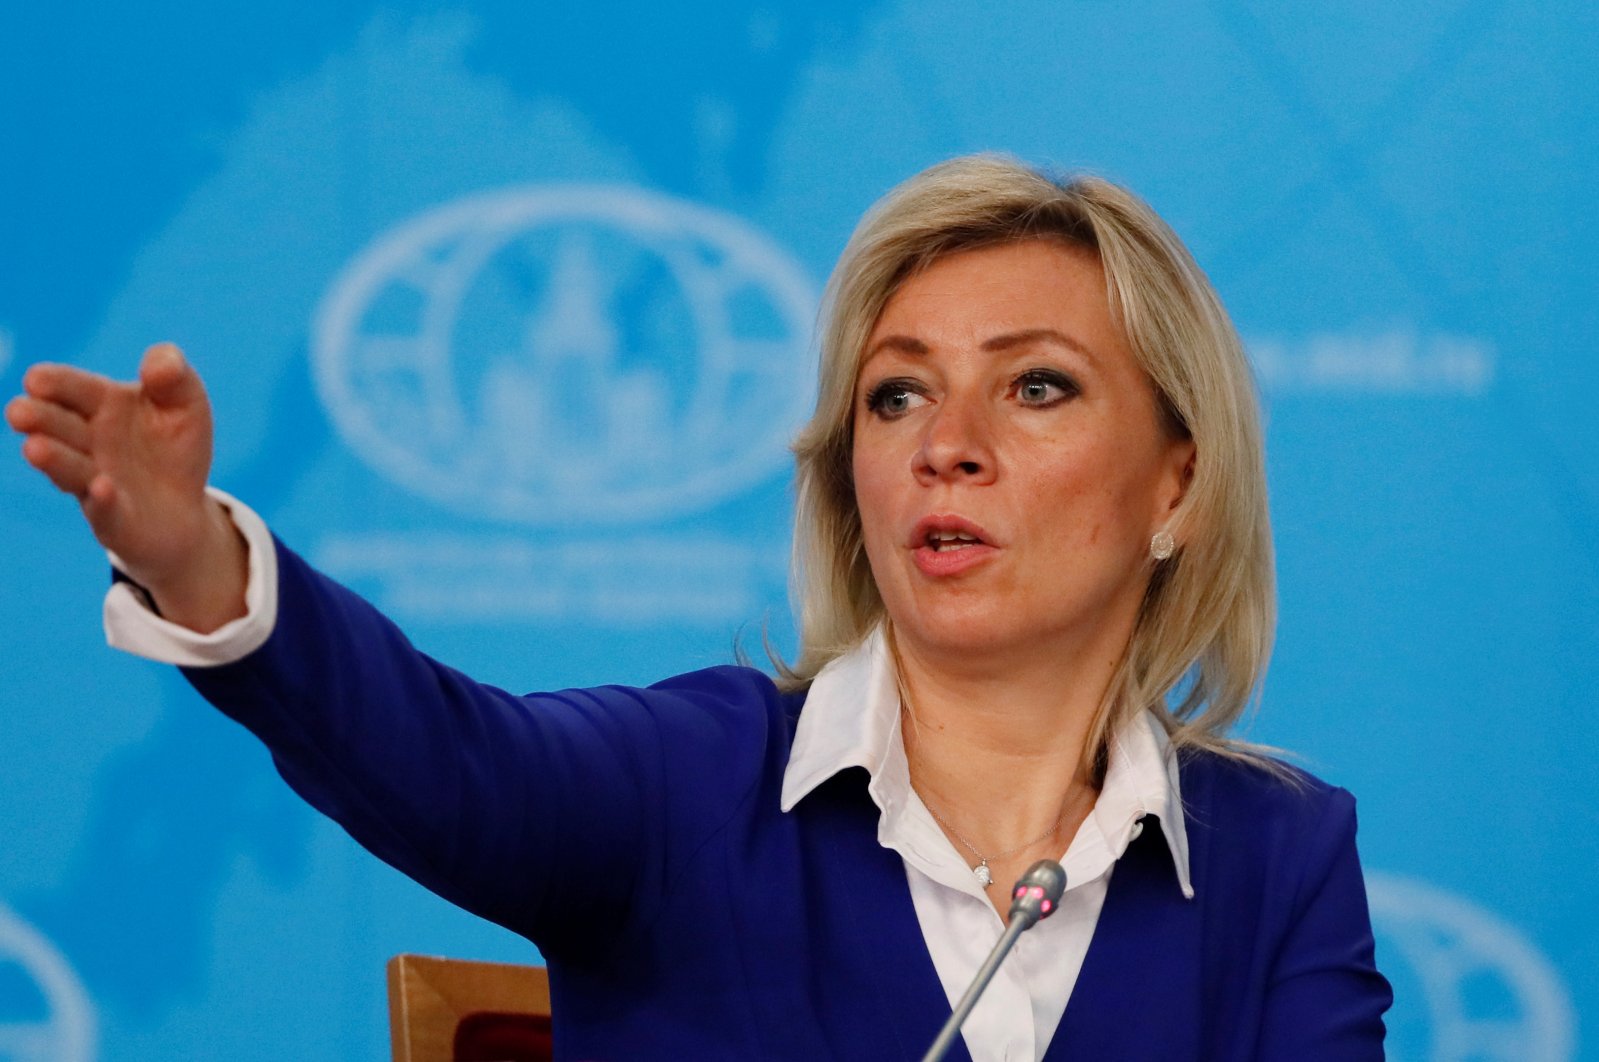 Russia&#039;s Foreign Ministry spokeswoman Maria Zakharova gestures during the annual news conference of the acting Foreign Minister Sergei Lavrov (not pictured) in Moscow, Russia Jan. 17, 2020. (Reuters File Photo)